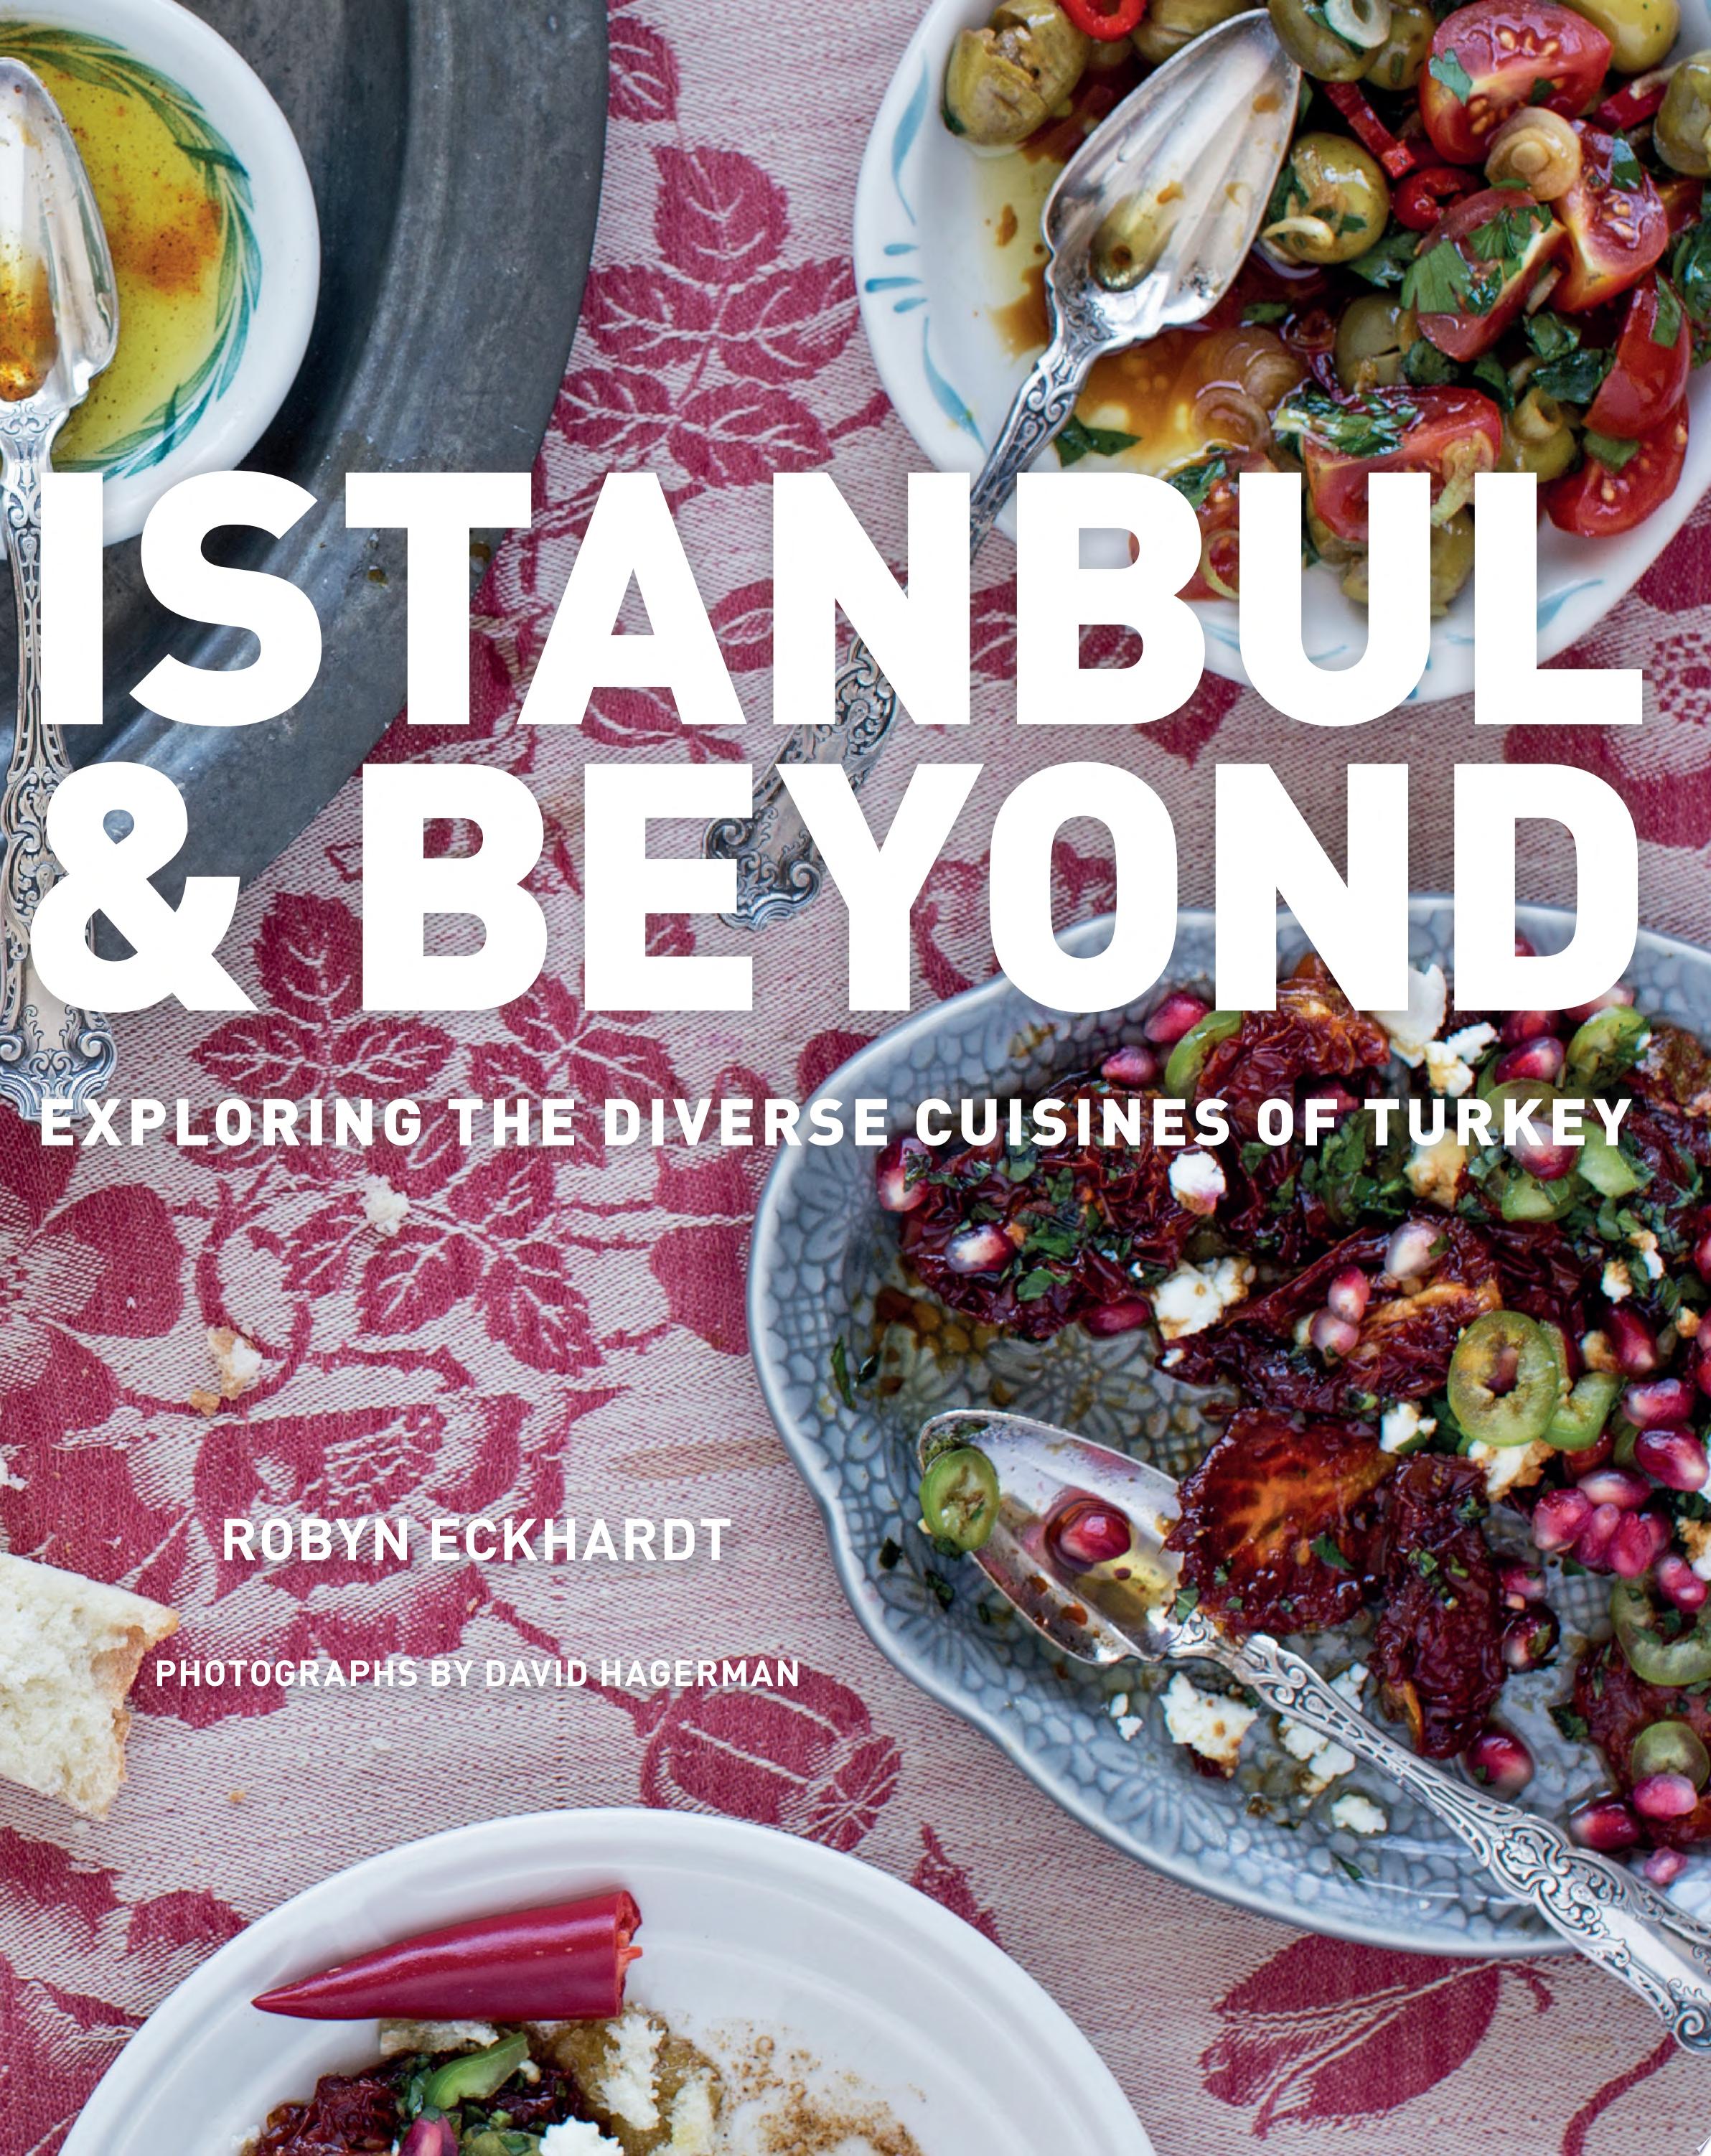 Image for "Istanbul and Beyond"